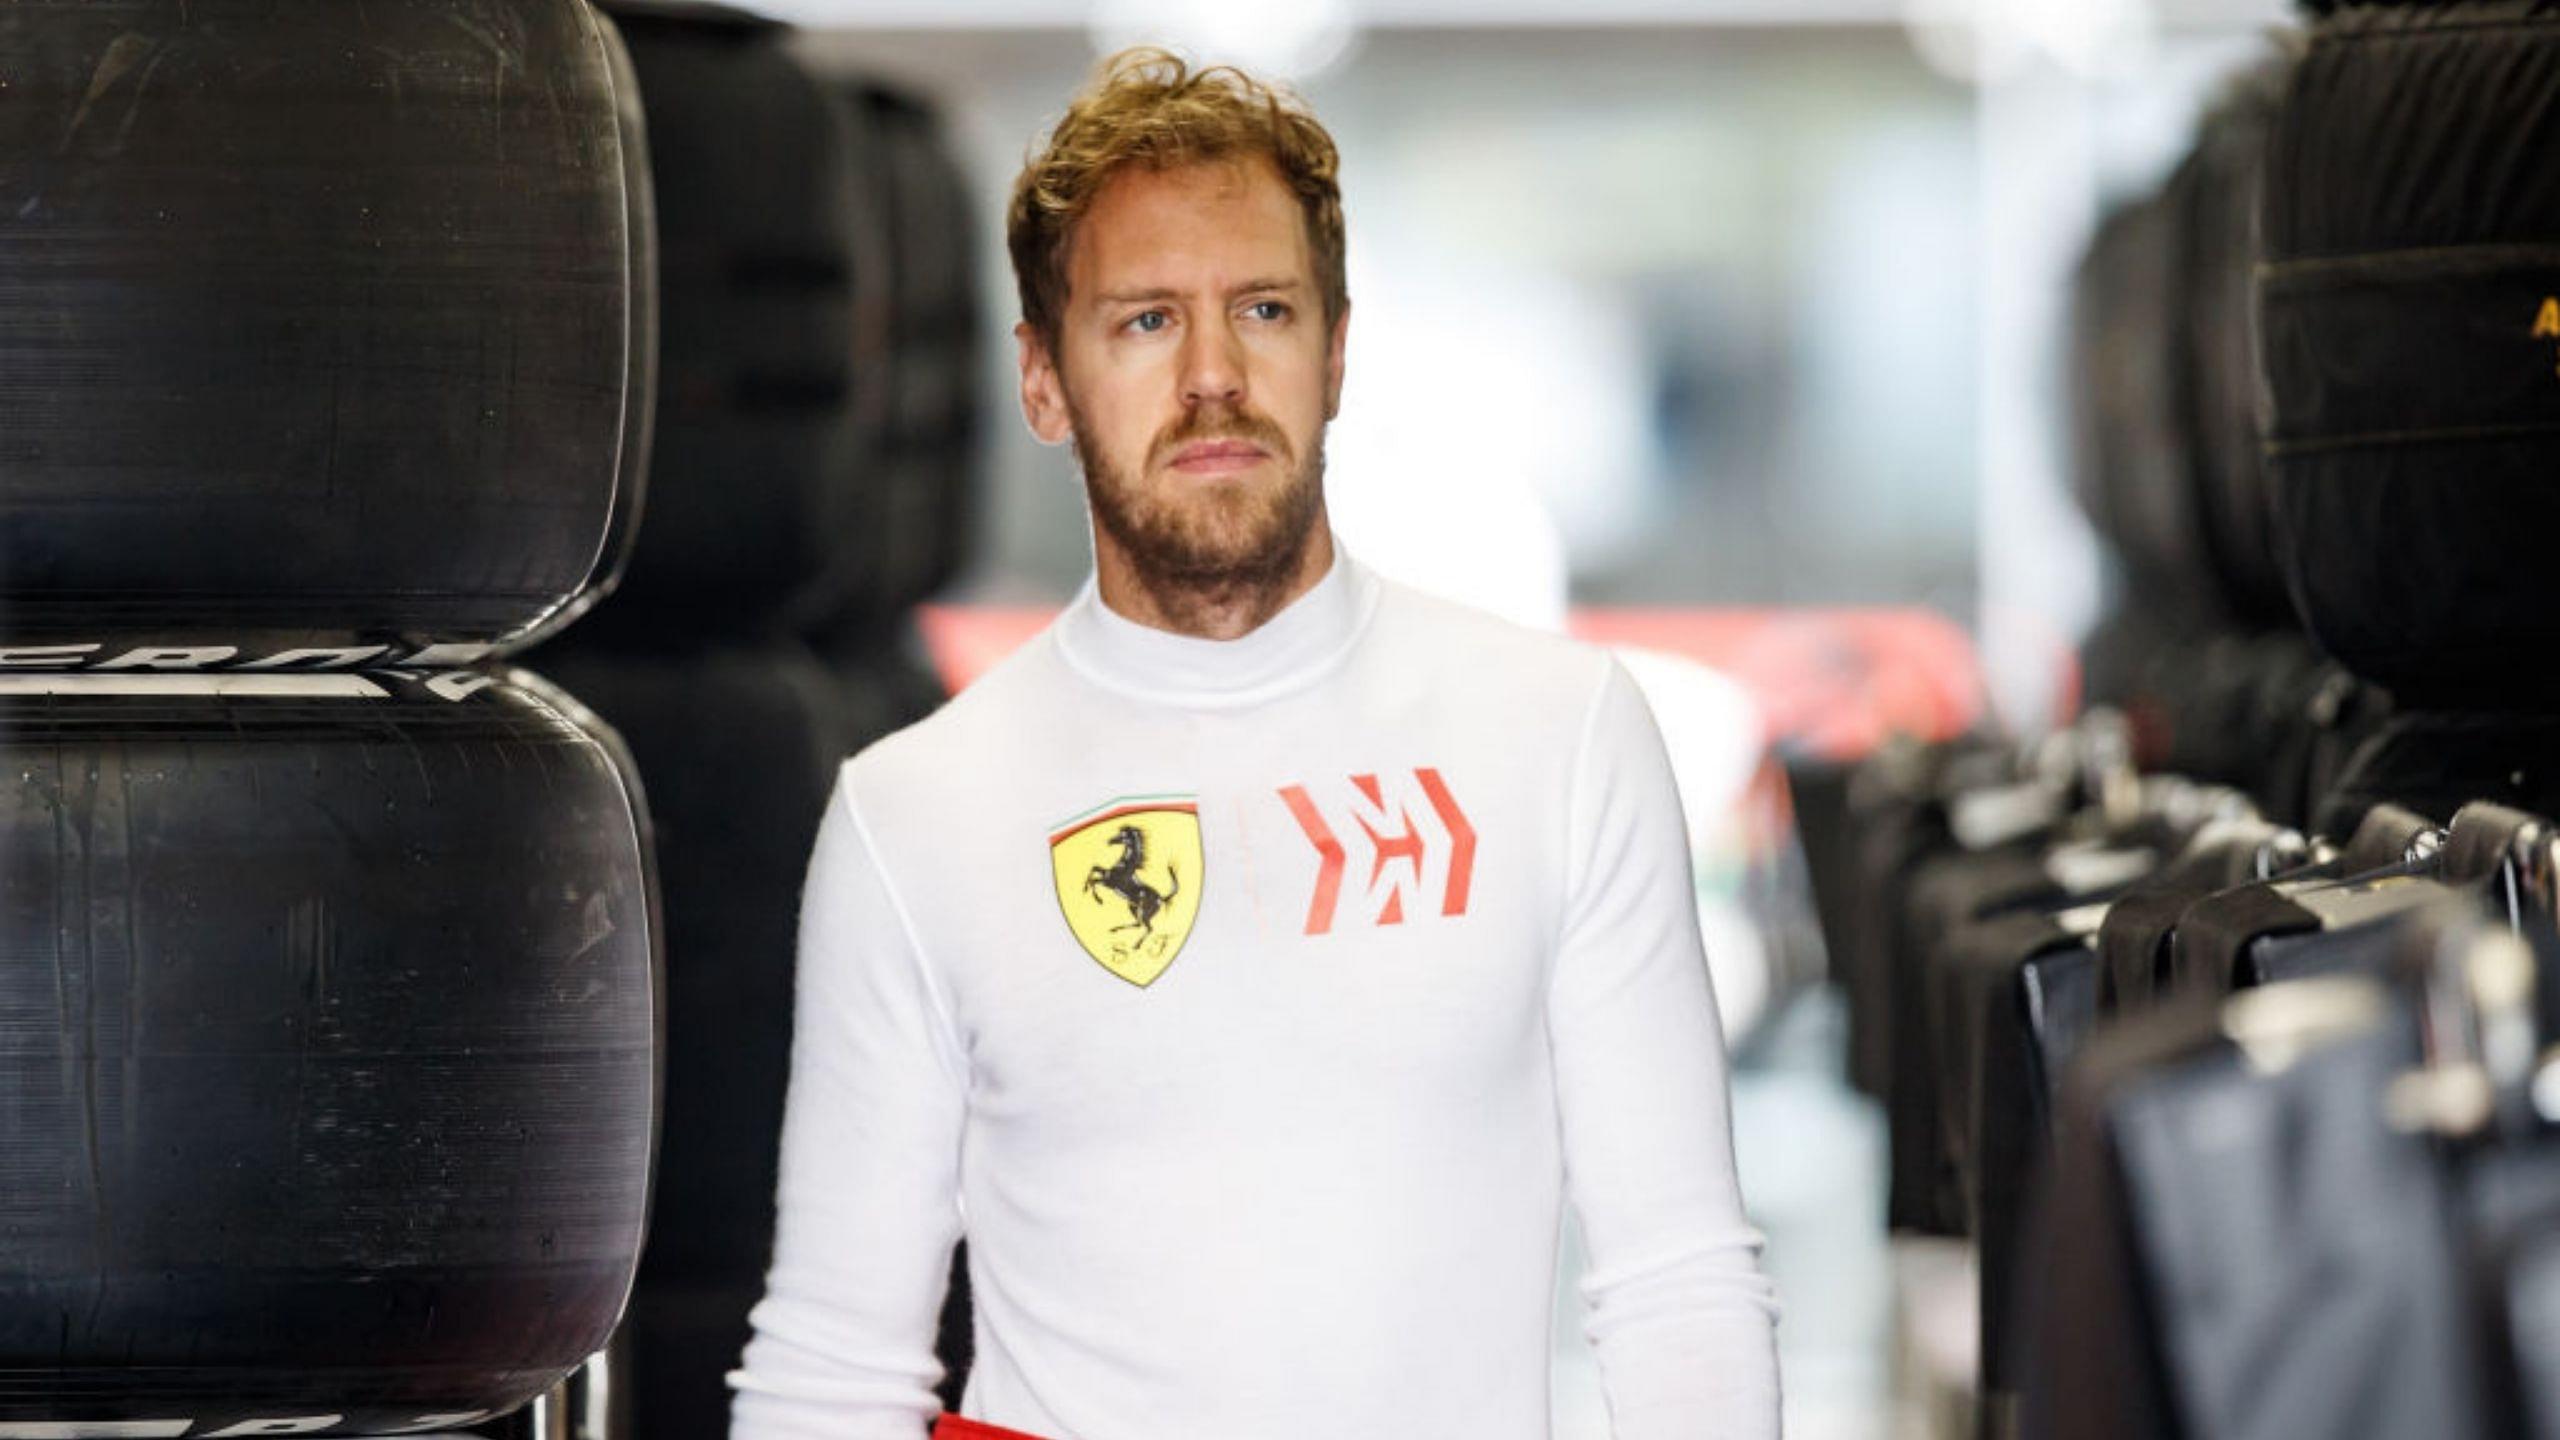 “He’s driving in another league" - Sebastian Vettel concedes Ferrari teammate Charles Leclerc on a different level at Portuguese GP